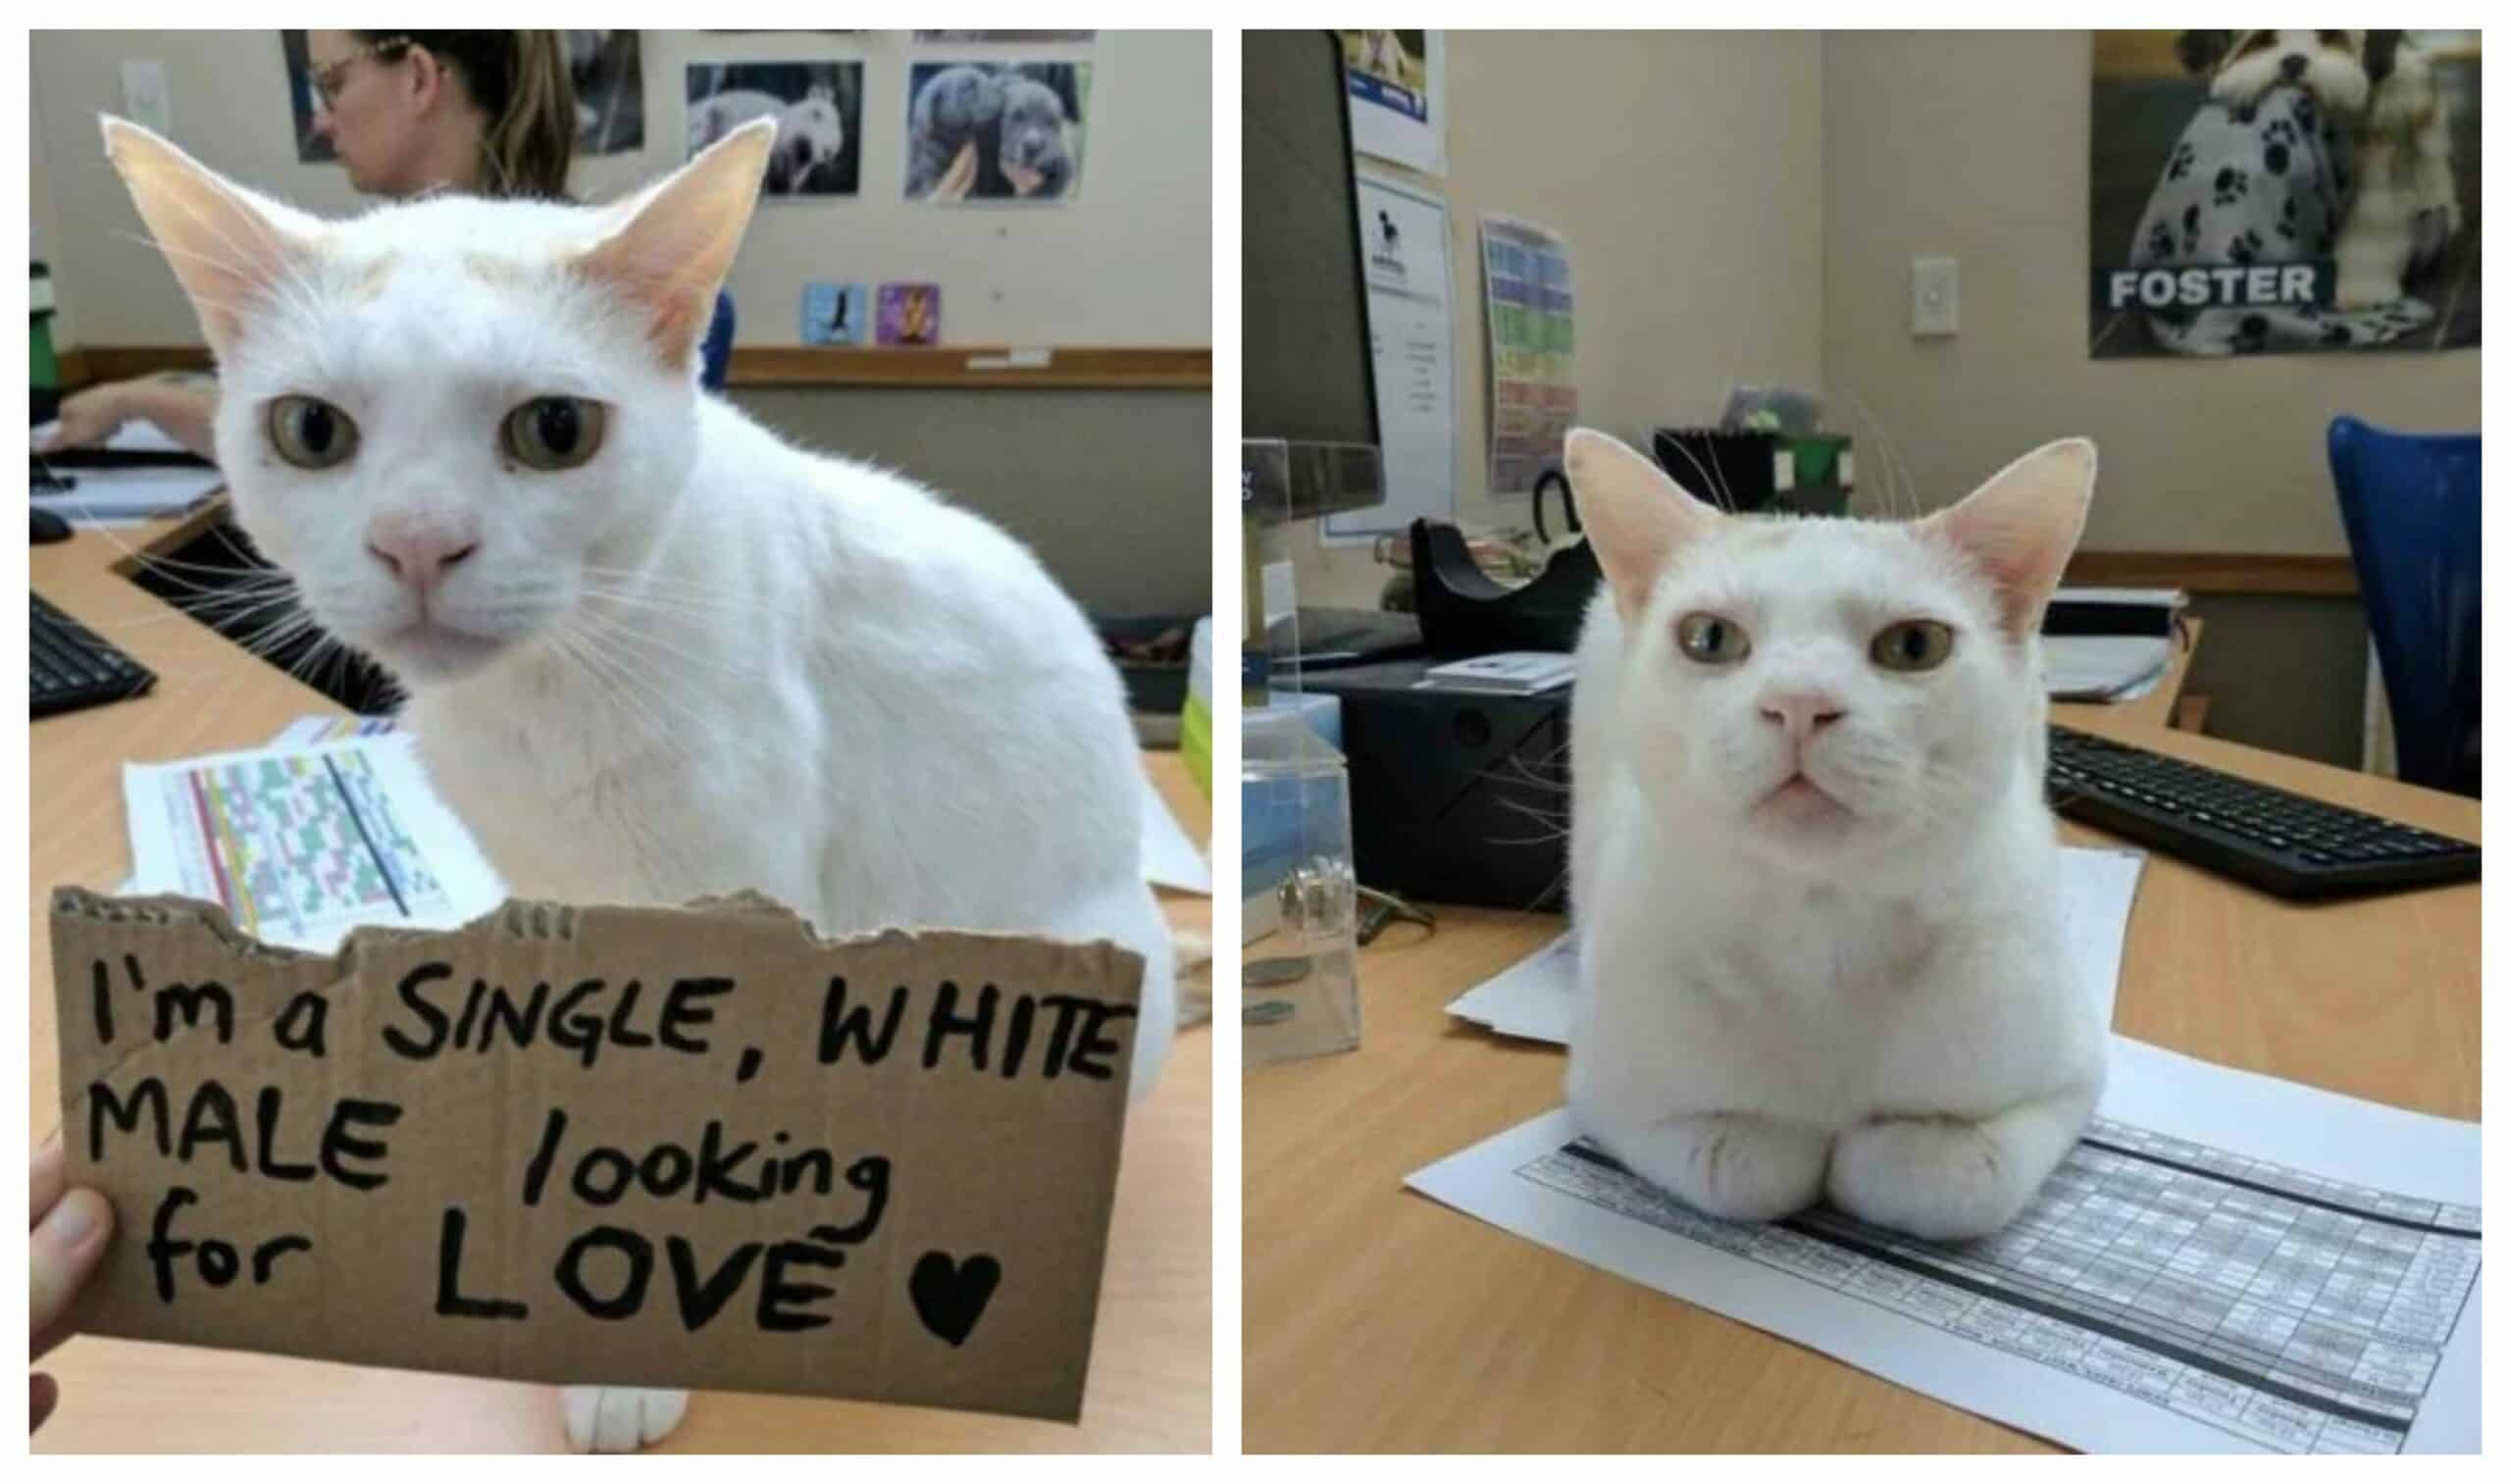 After 433 days, the unwanted cat is finally adopted